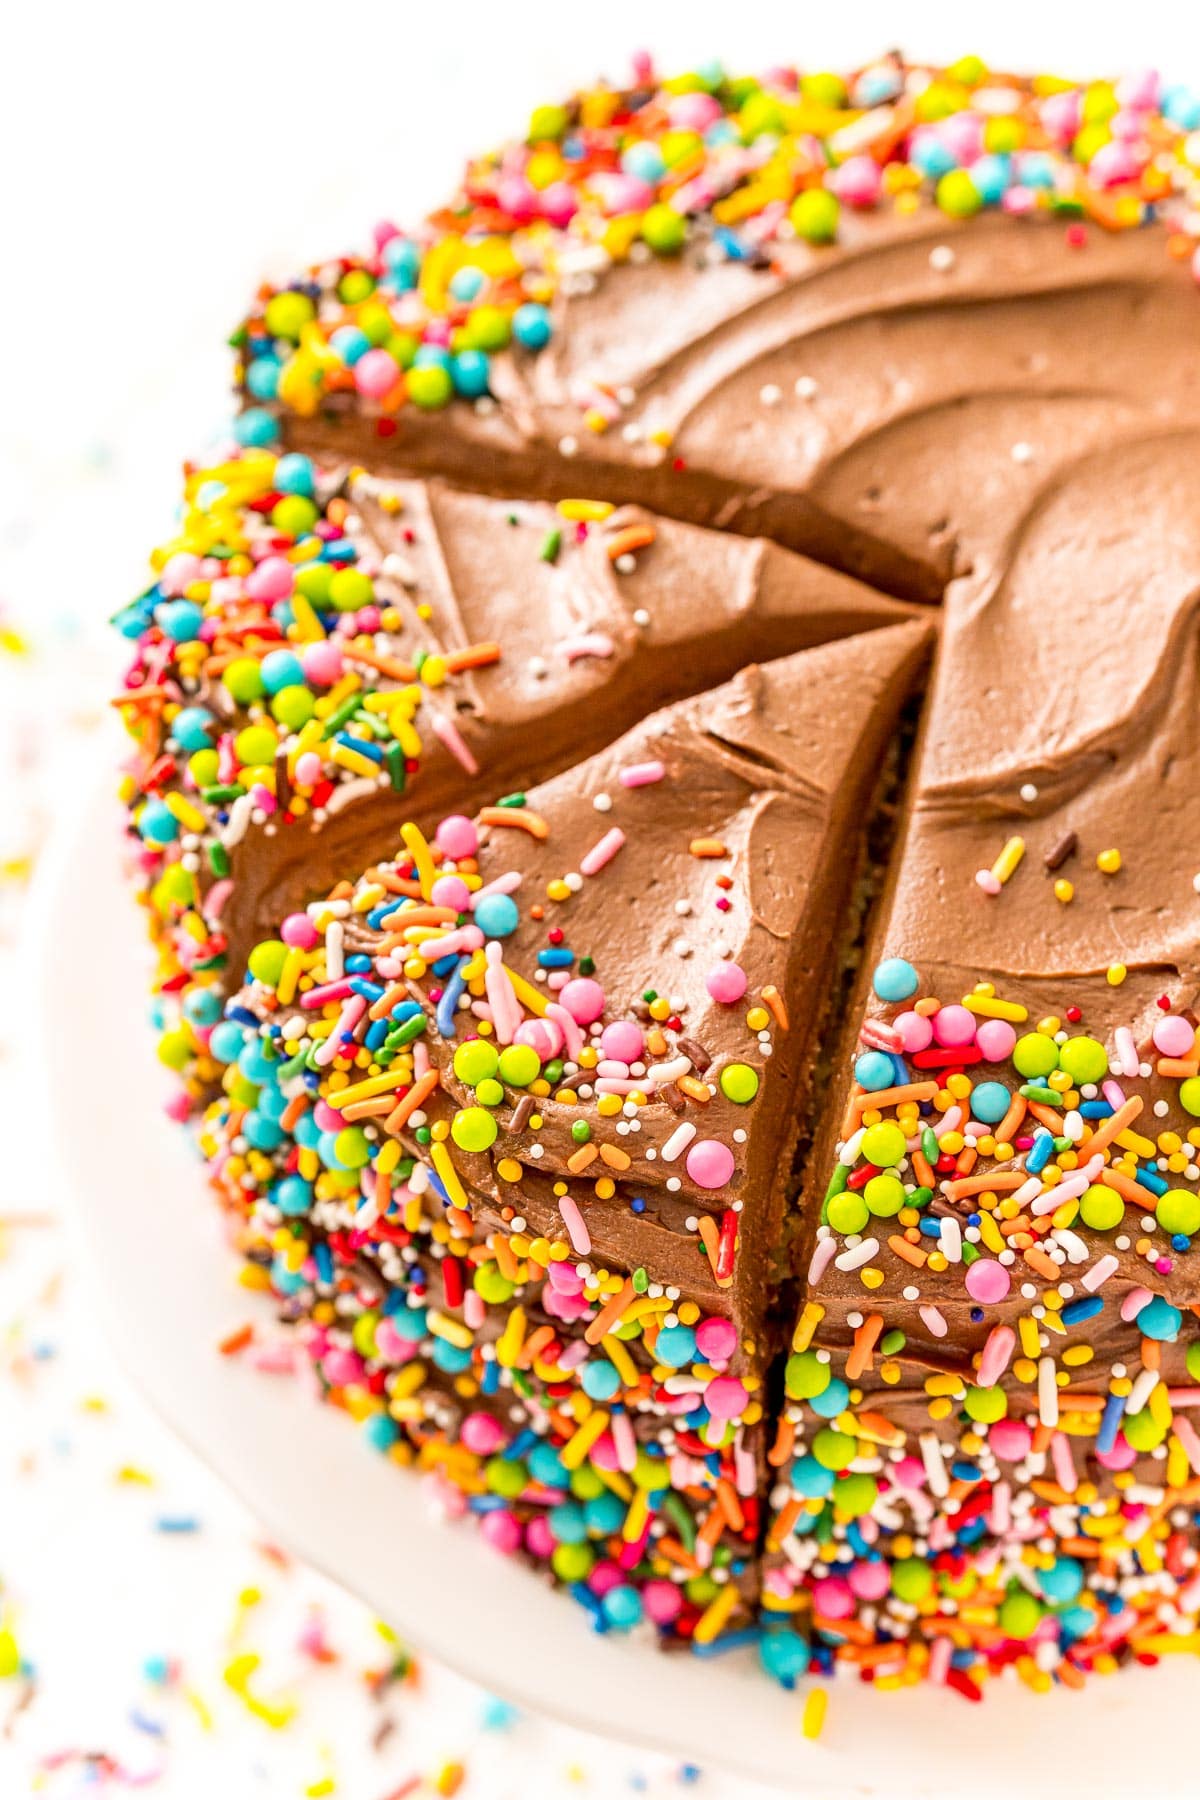 Chocolate frosted yellow cake with sprinkles.